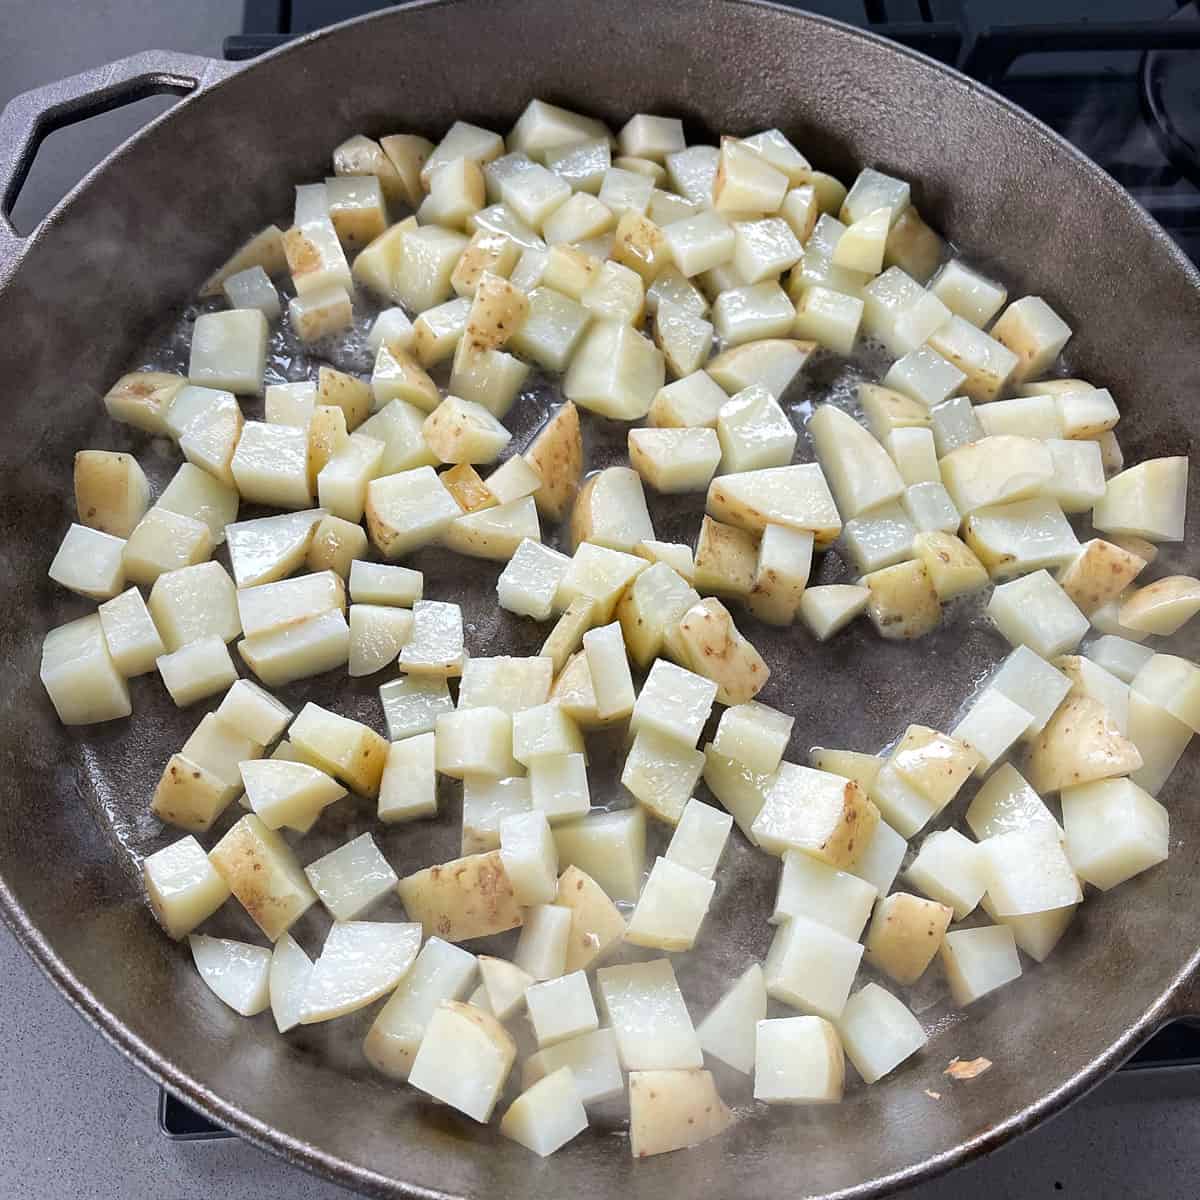 Cubed potatoes cooking in a skillet pan.